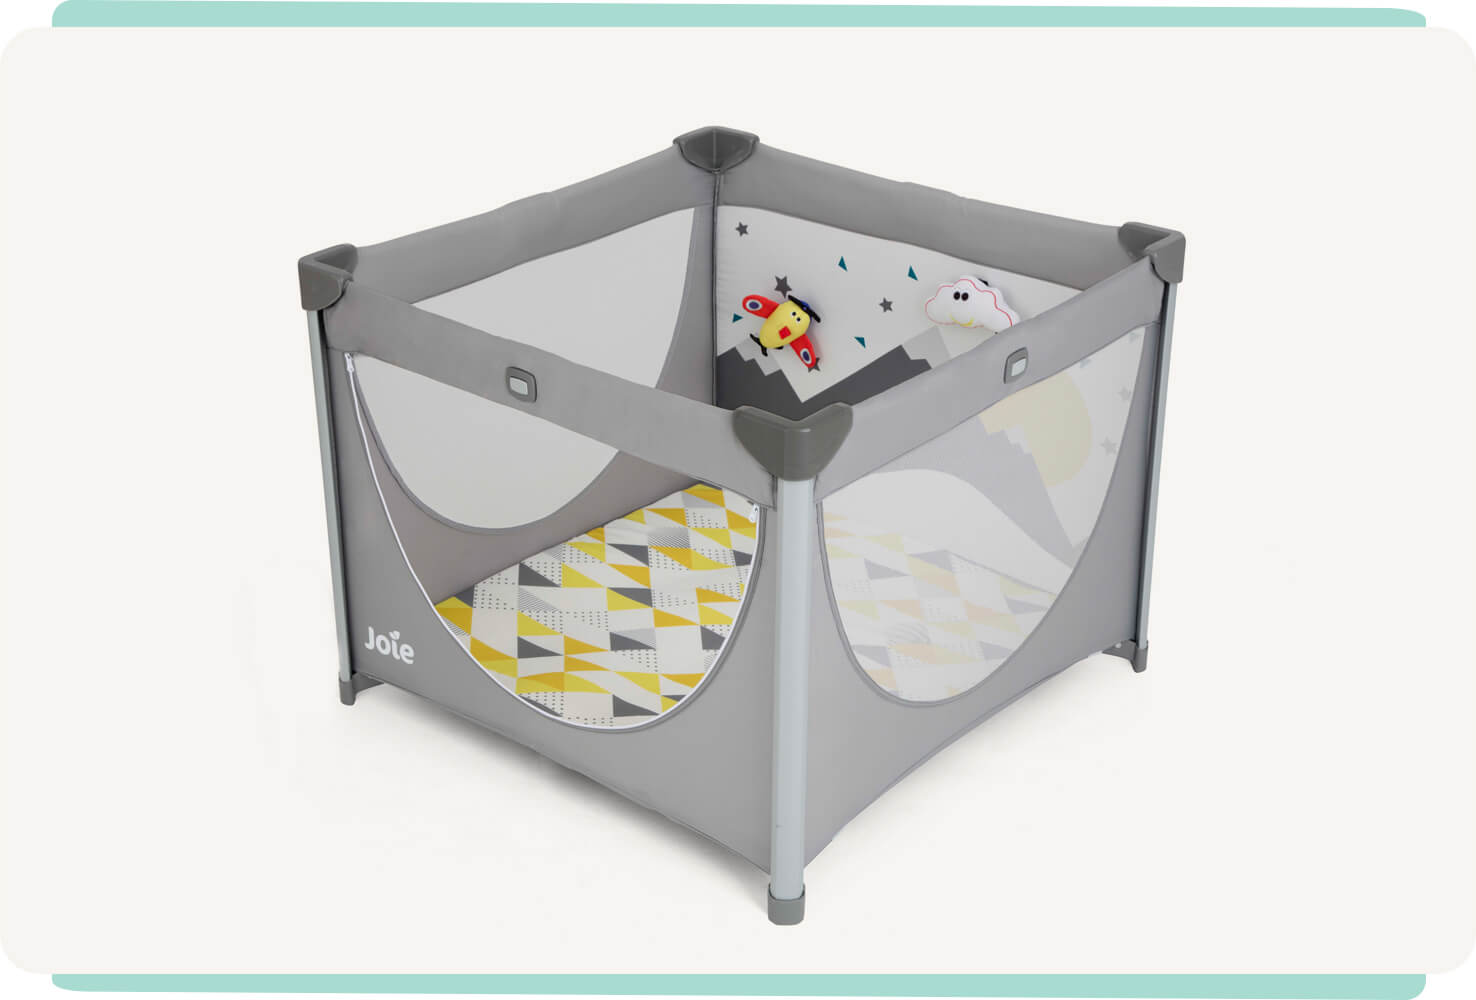 Joie Cheer playpen at an angle.